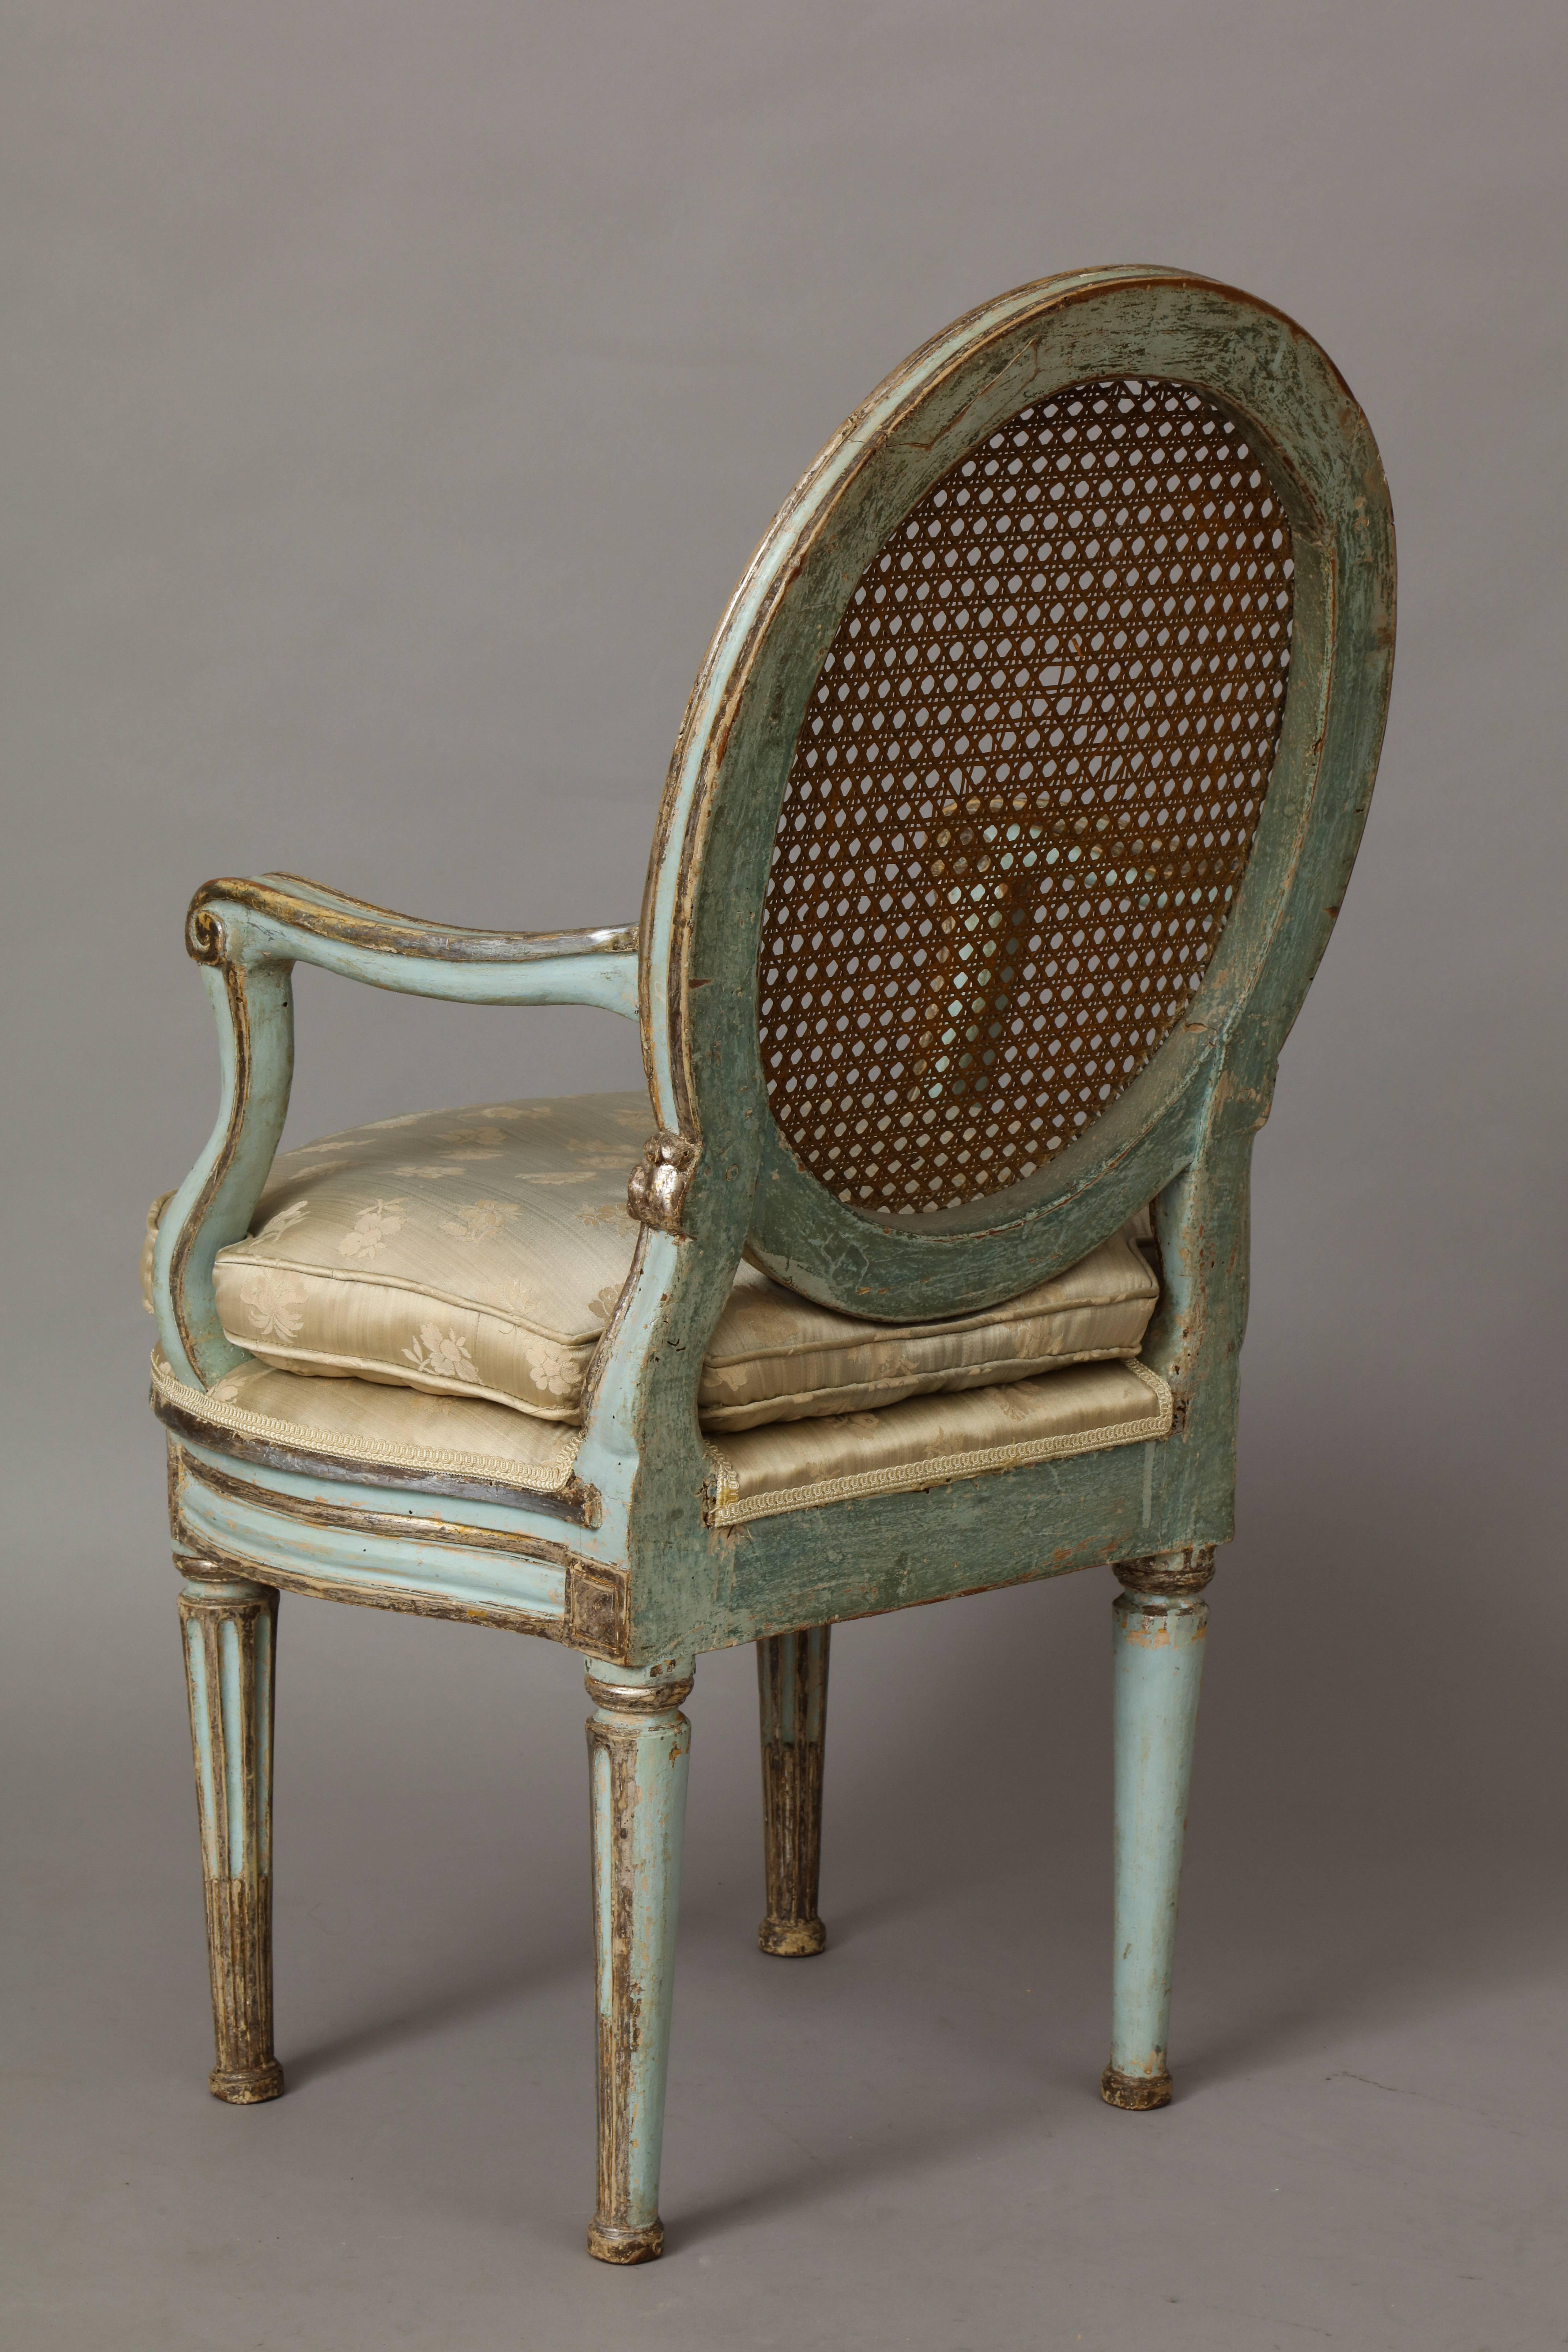 Late 18th Century Venetian Neoclassic Painted Armchair with Oval Caned Back